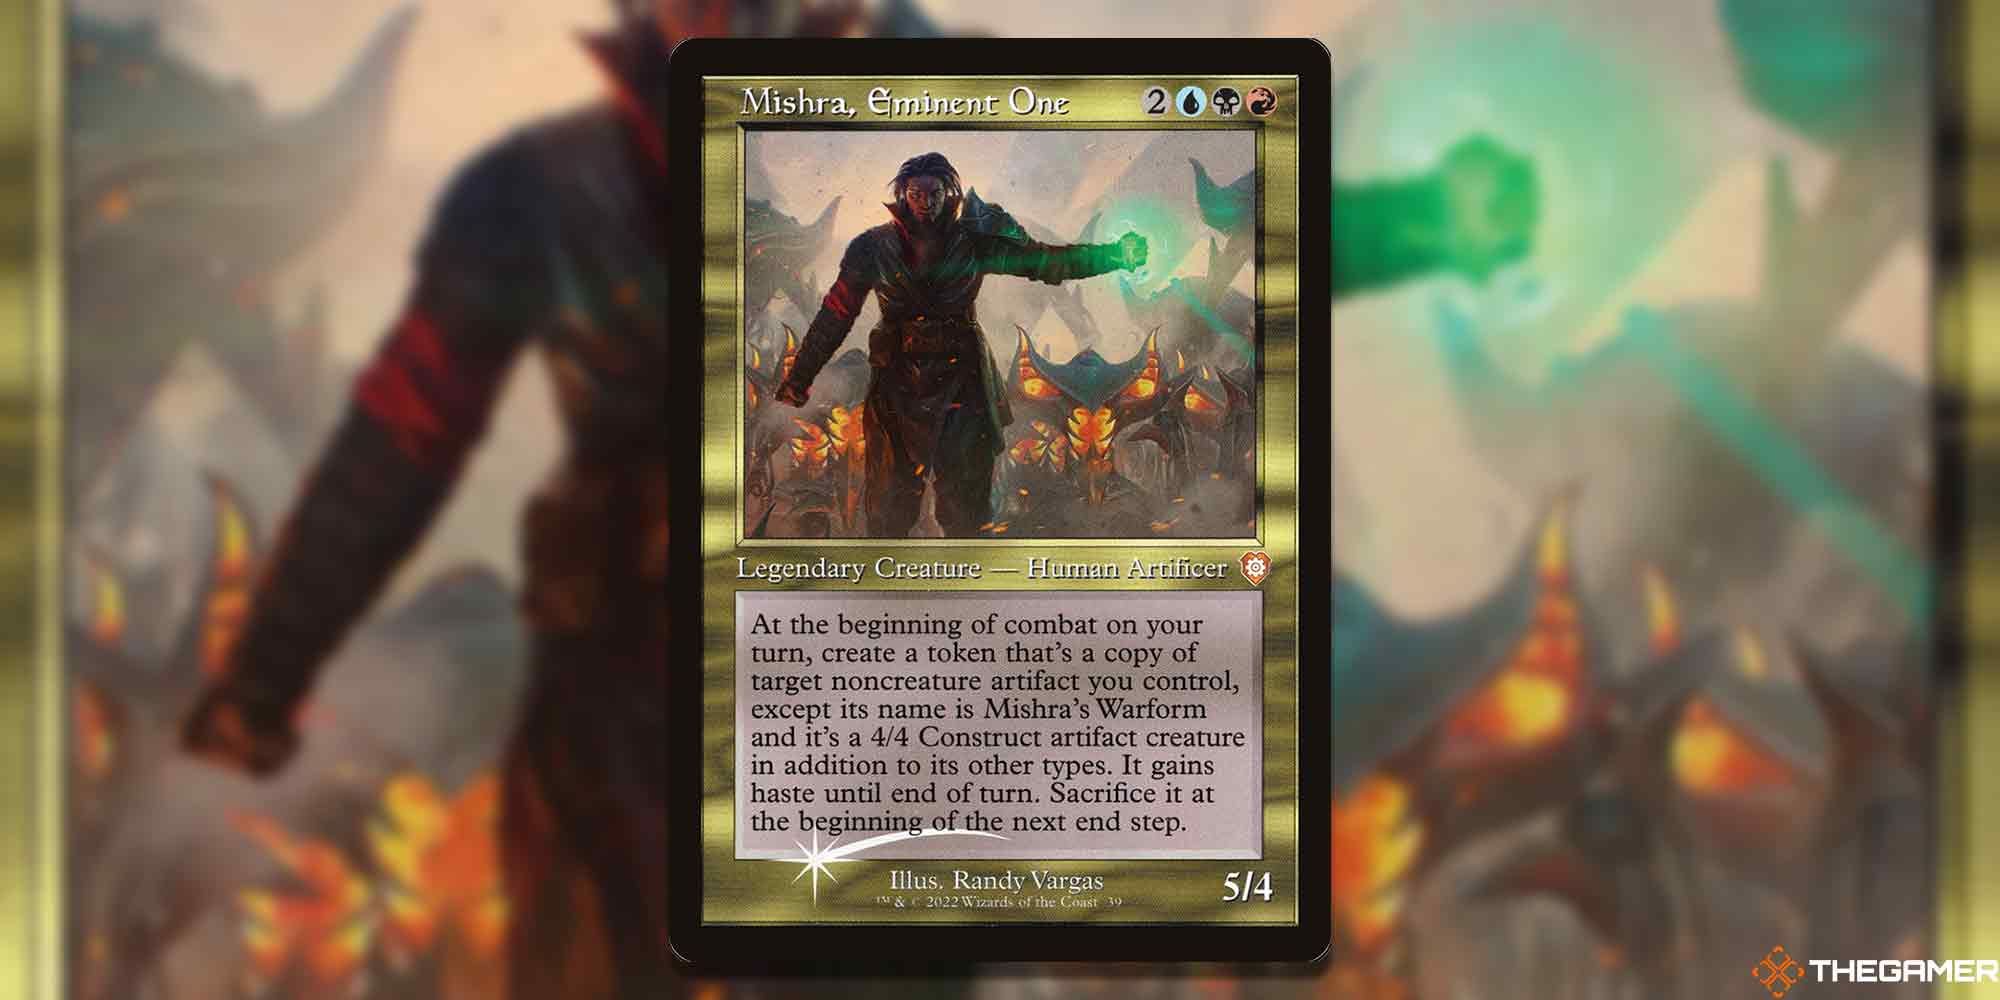 Mishra, Eminent One card from mtg